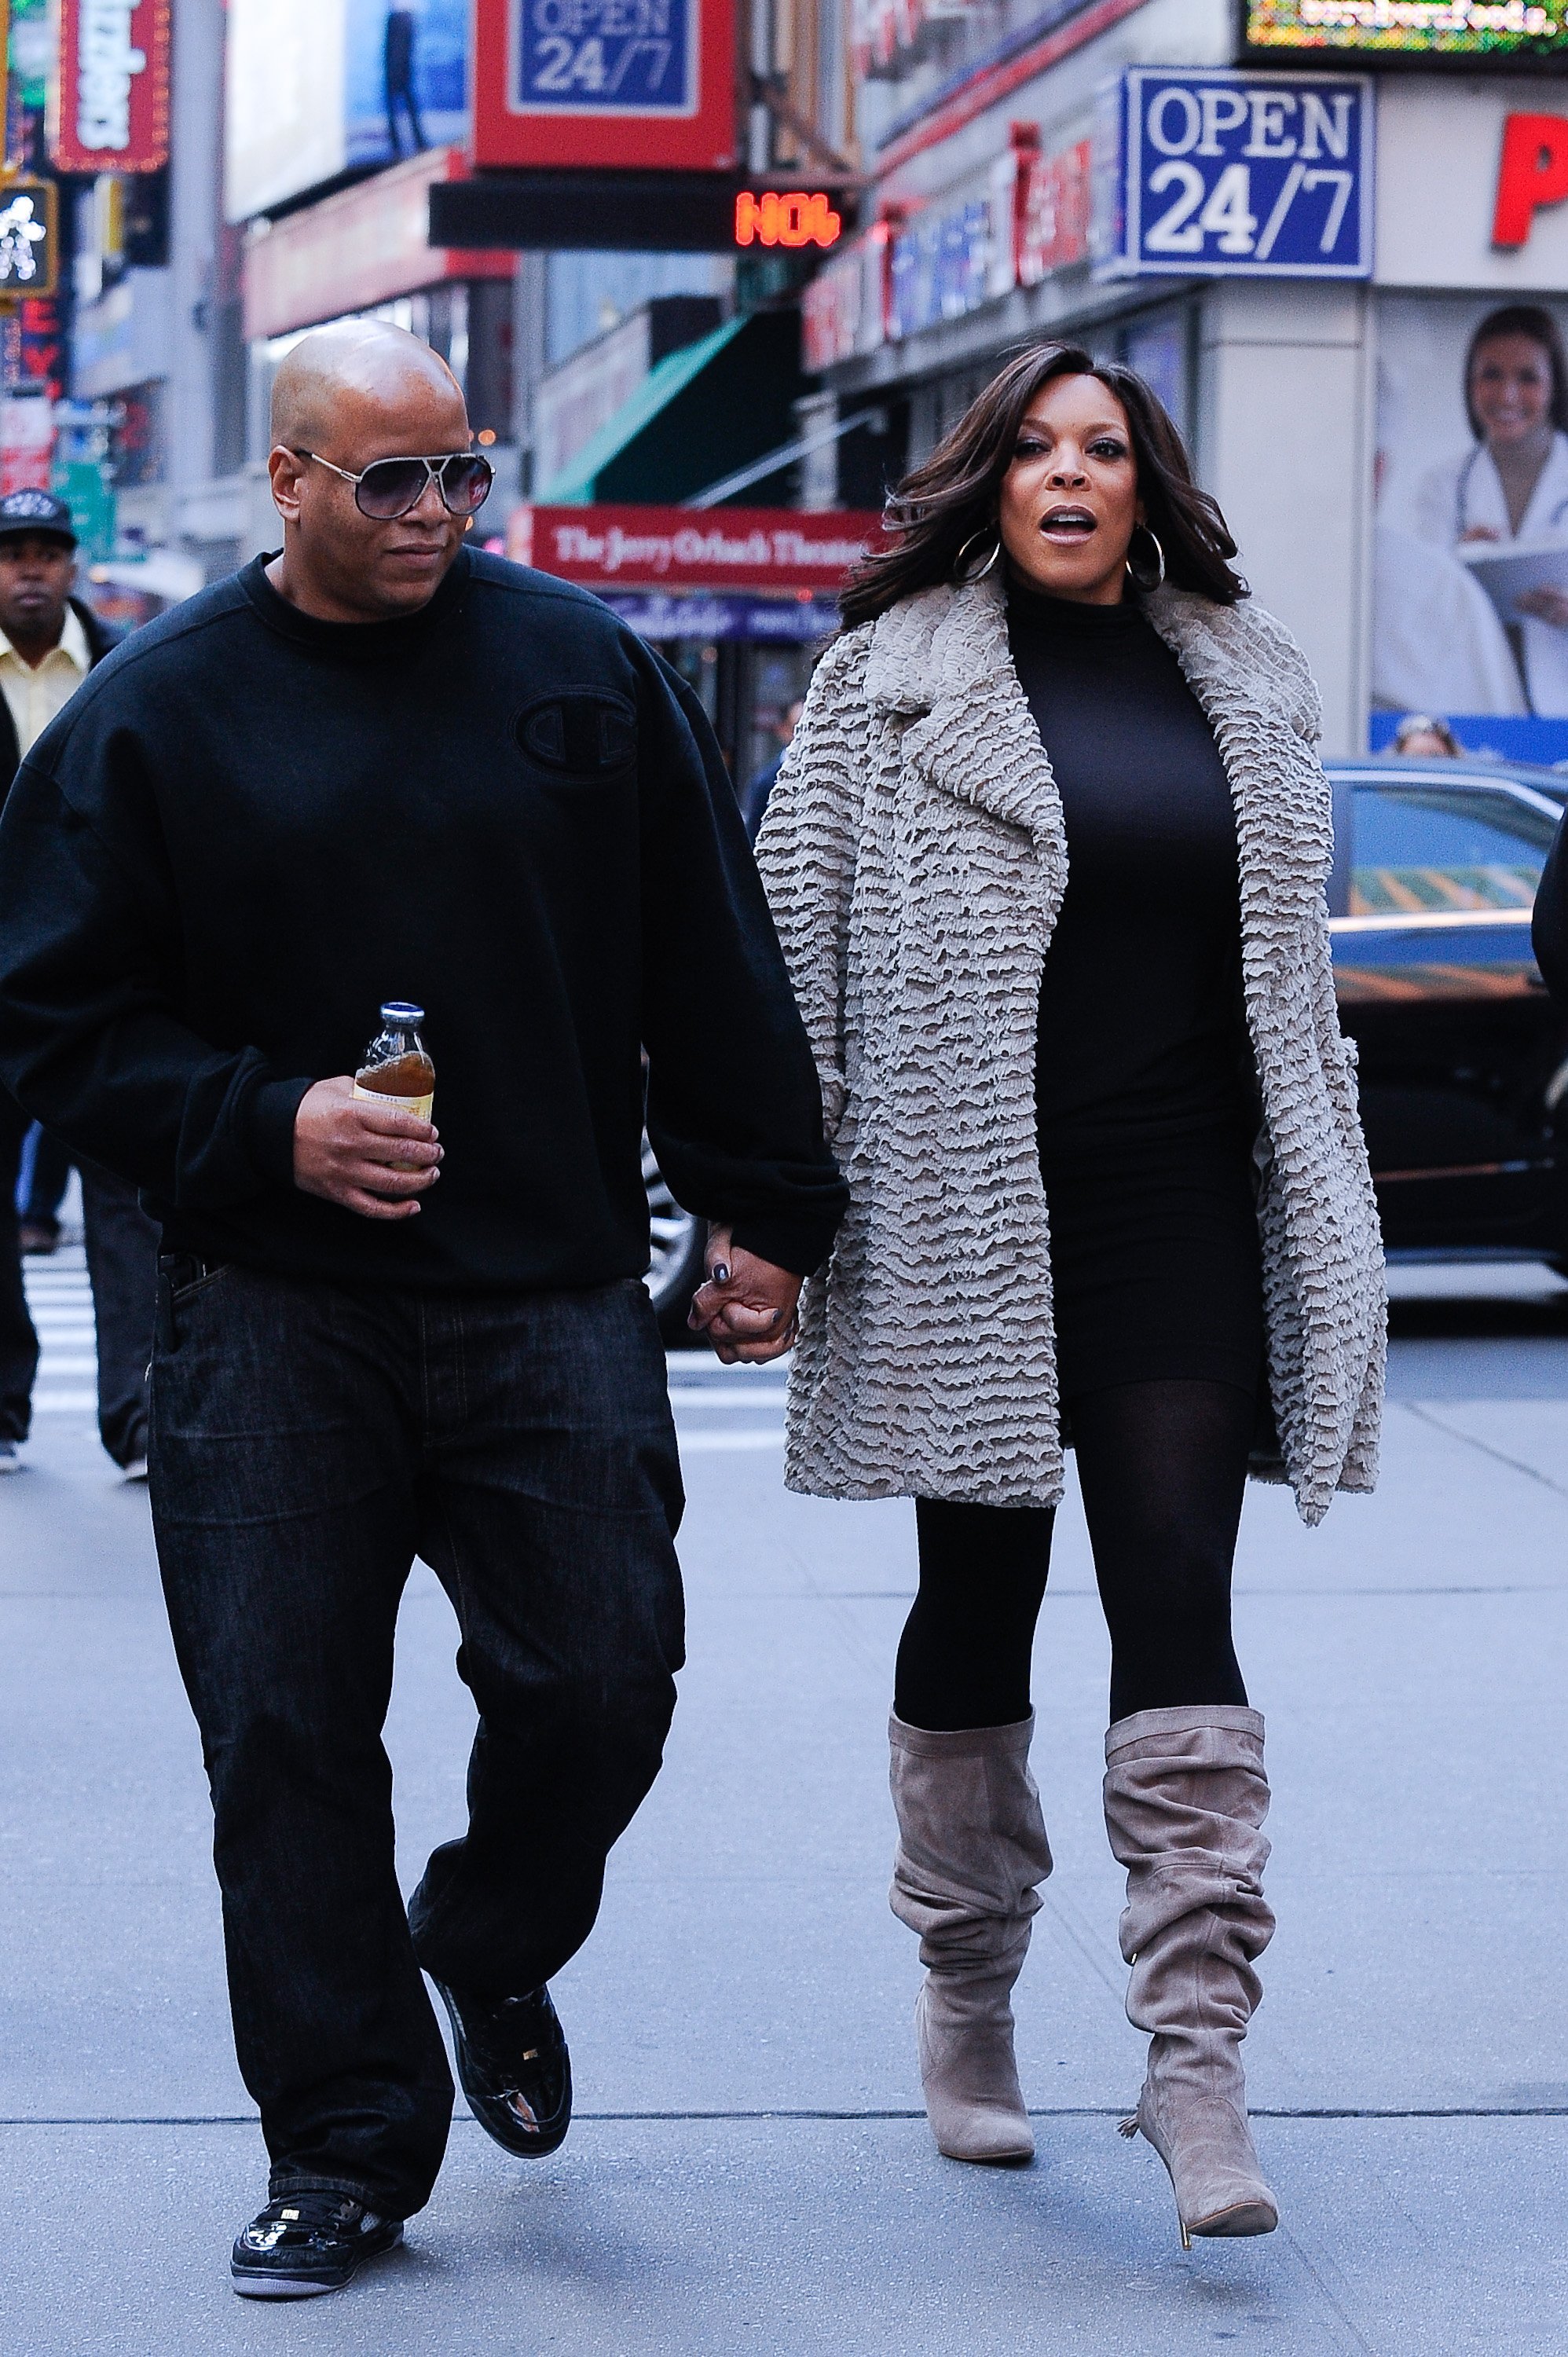 Wendy Williams & Kevin Hunter leave the "Celebrity Apprentice" film set in New York City on Oct. 19, 2010 | Photo: Getty Images